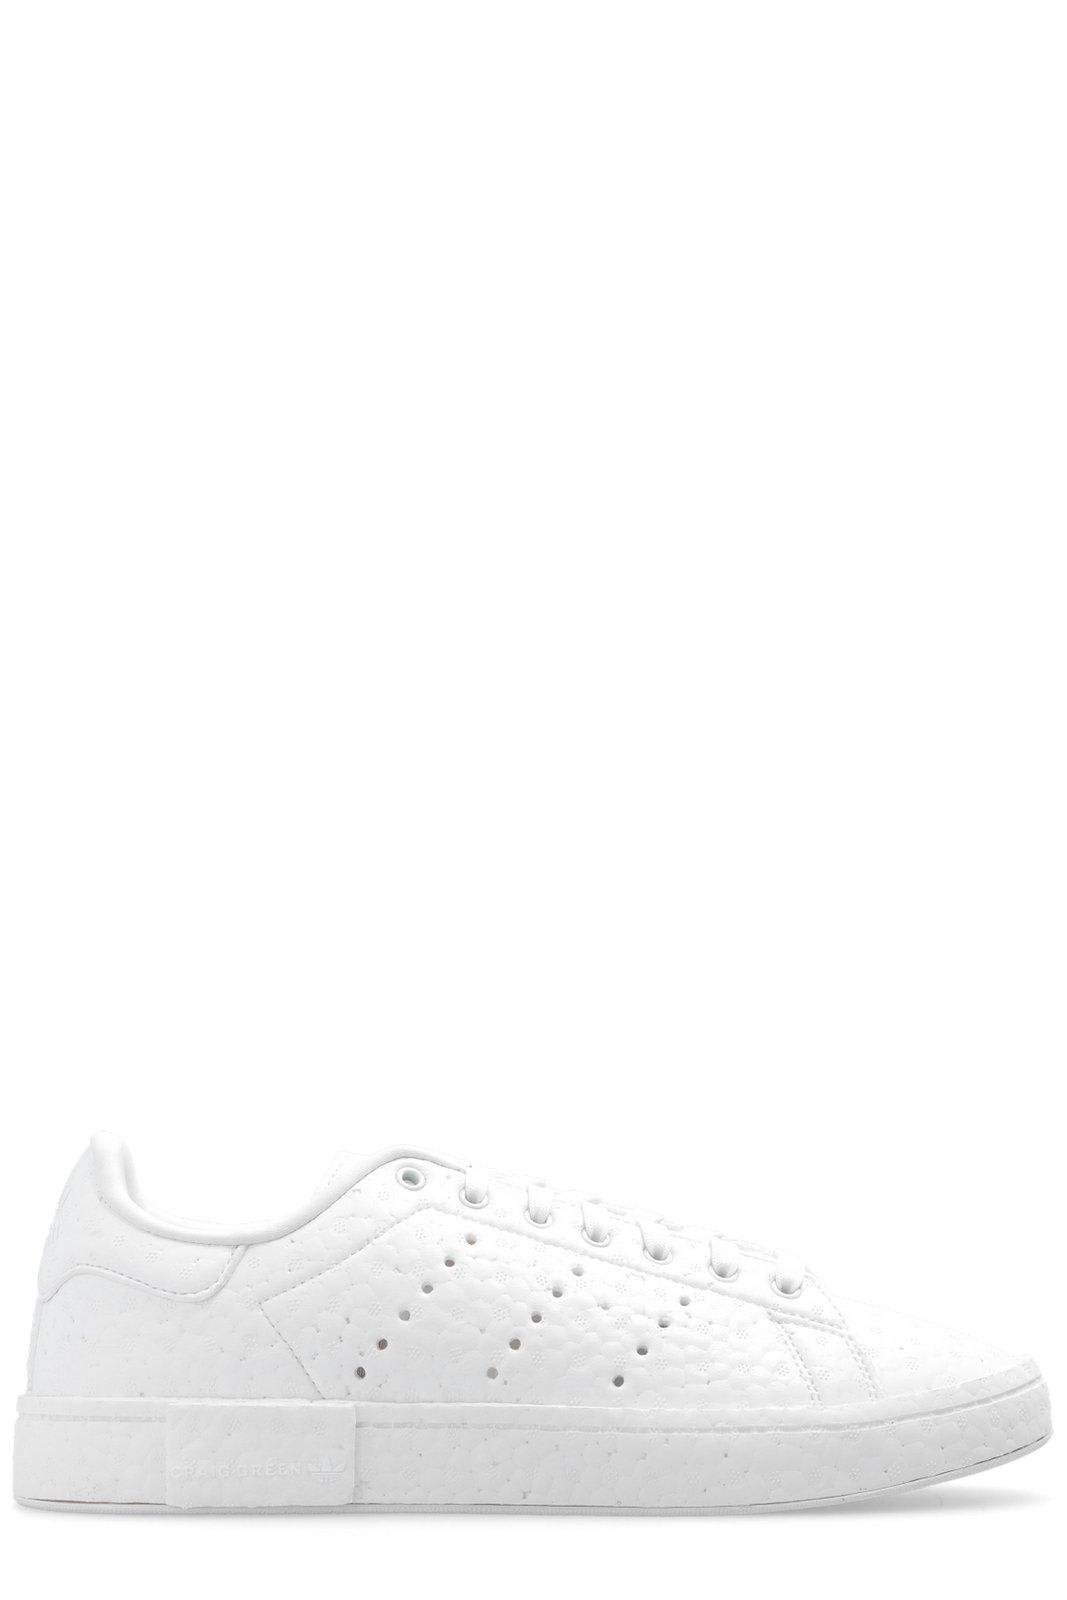 X Craig Green Stan Smith Lace-up Sneakers